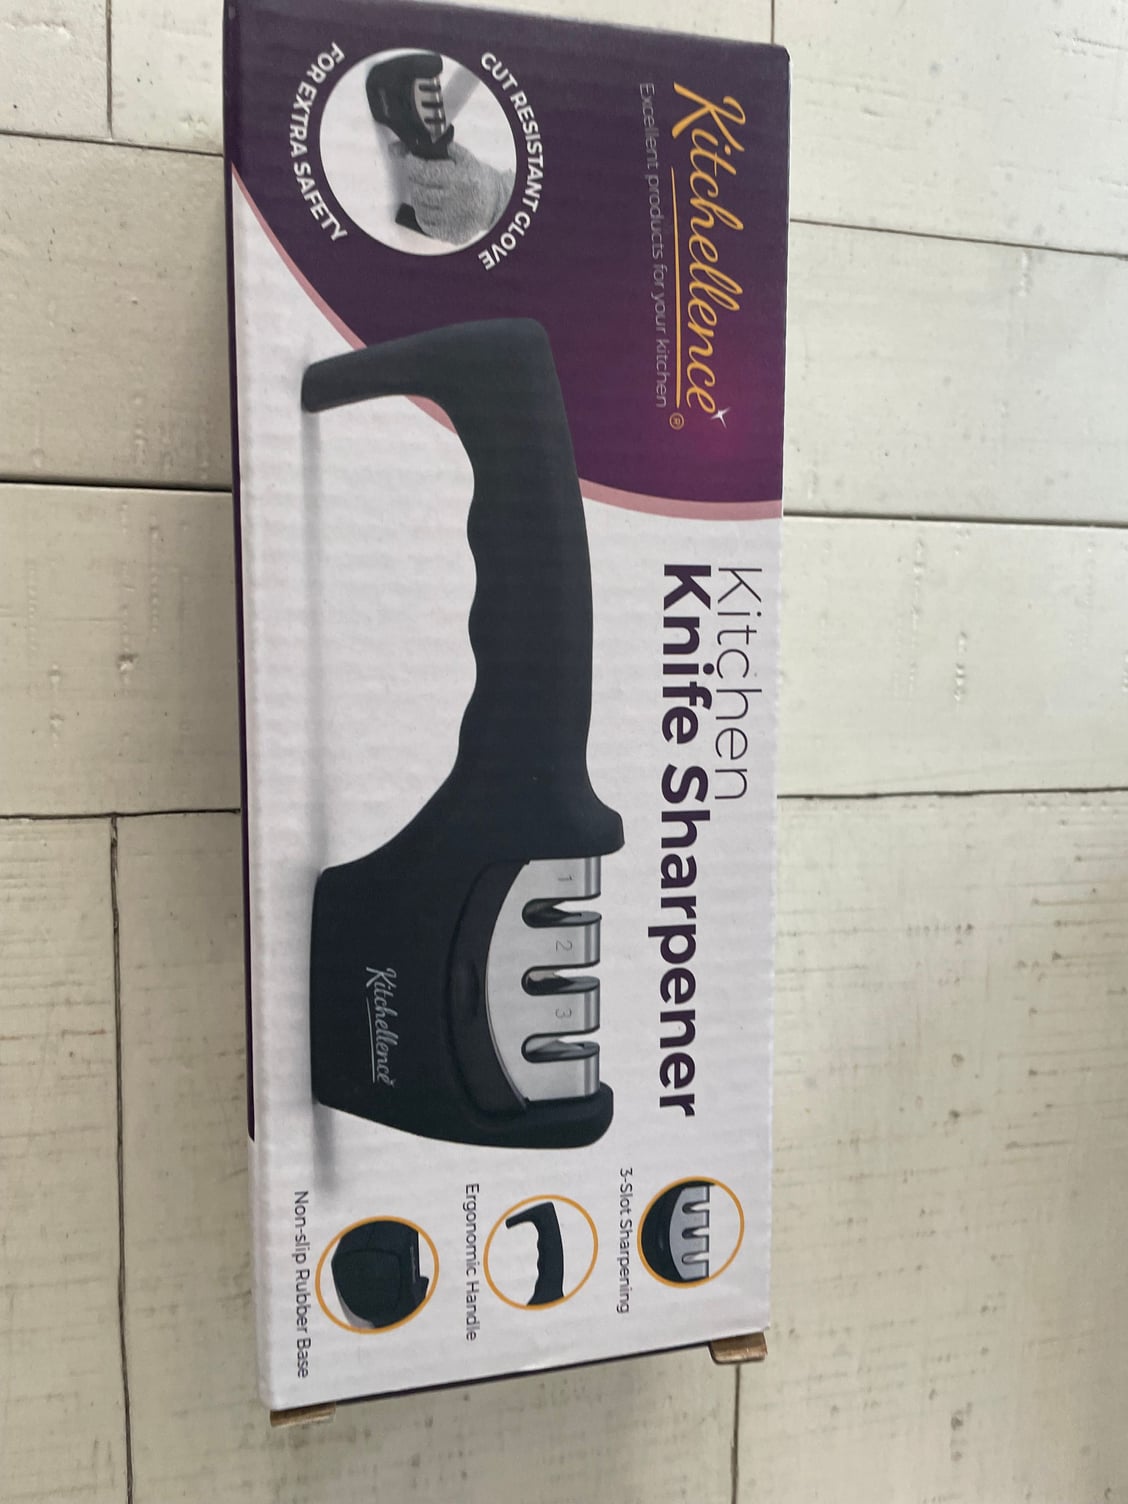 Kitchellence 3 Stage Knife Sharpener - Brand new - The Hull Truth